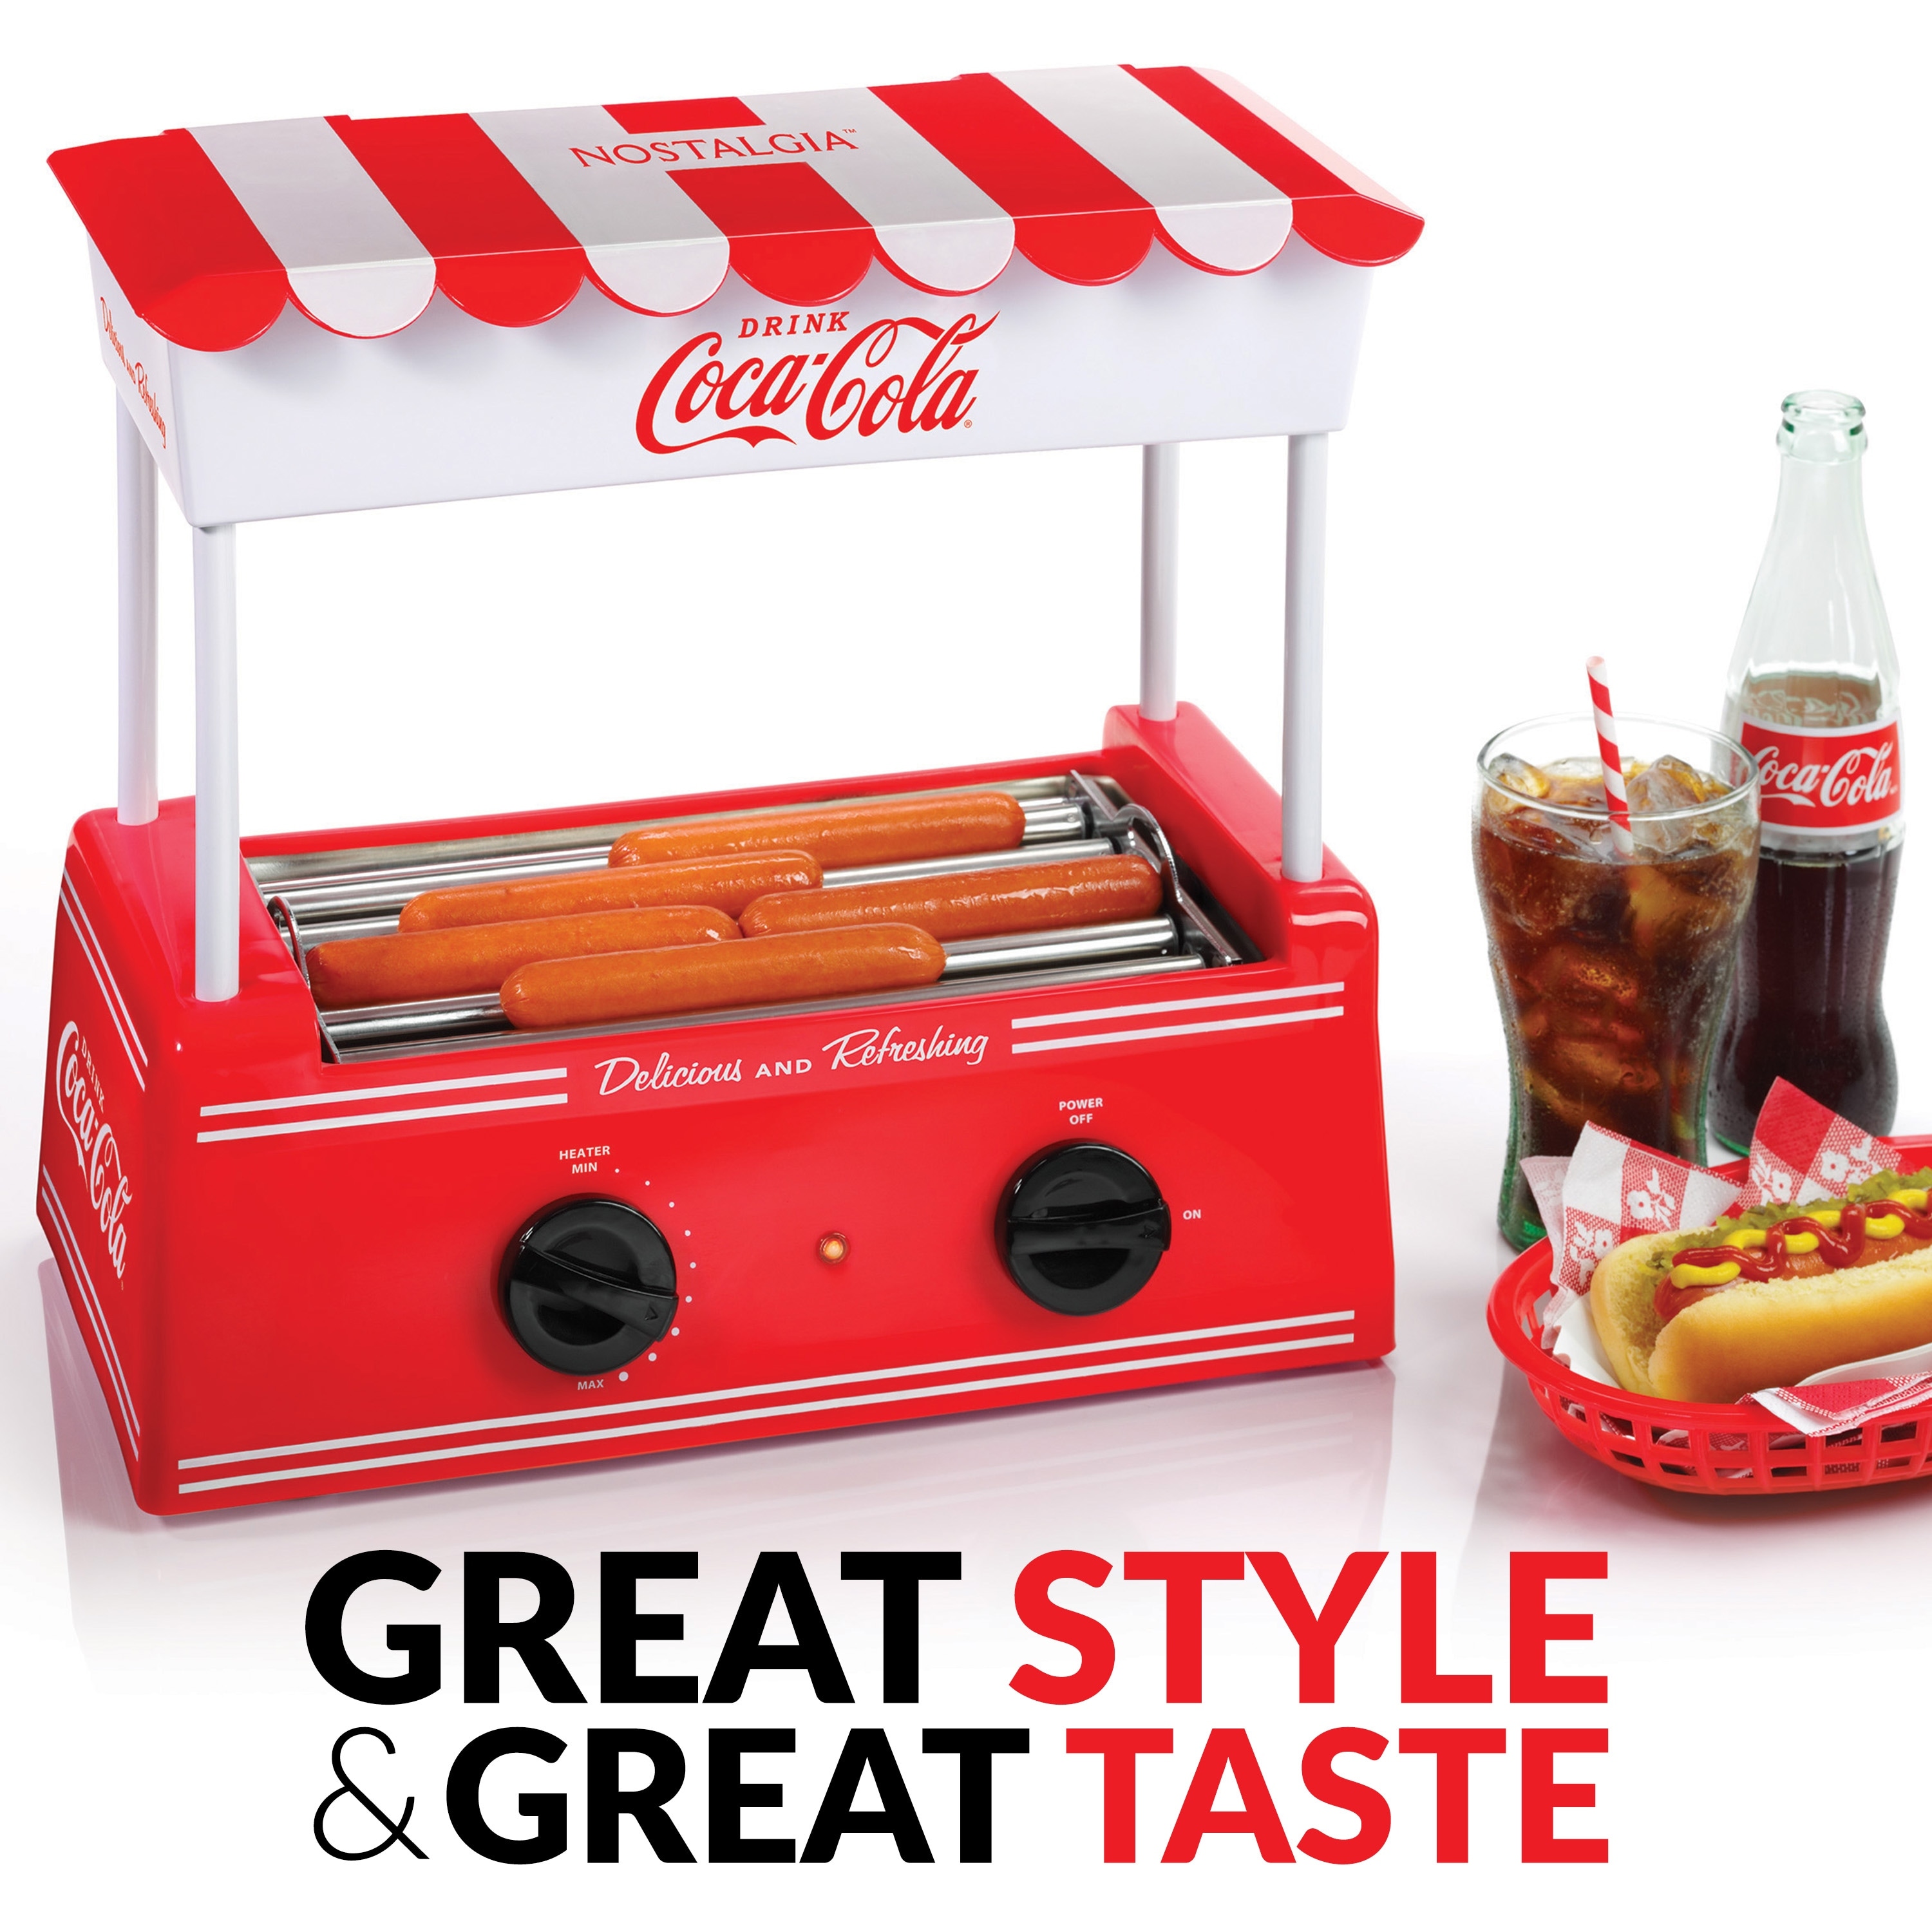 Hot Dog Table Top Sausage Roller Grill Food Warmer Display